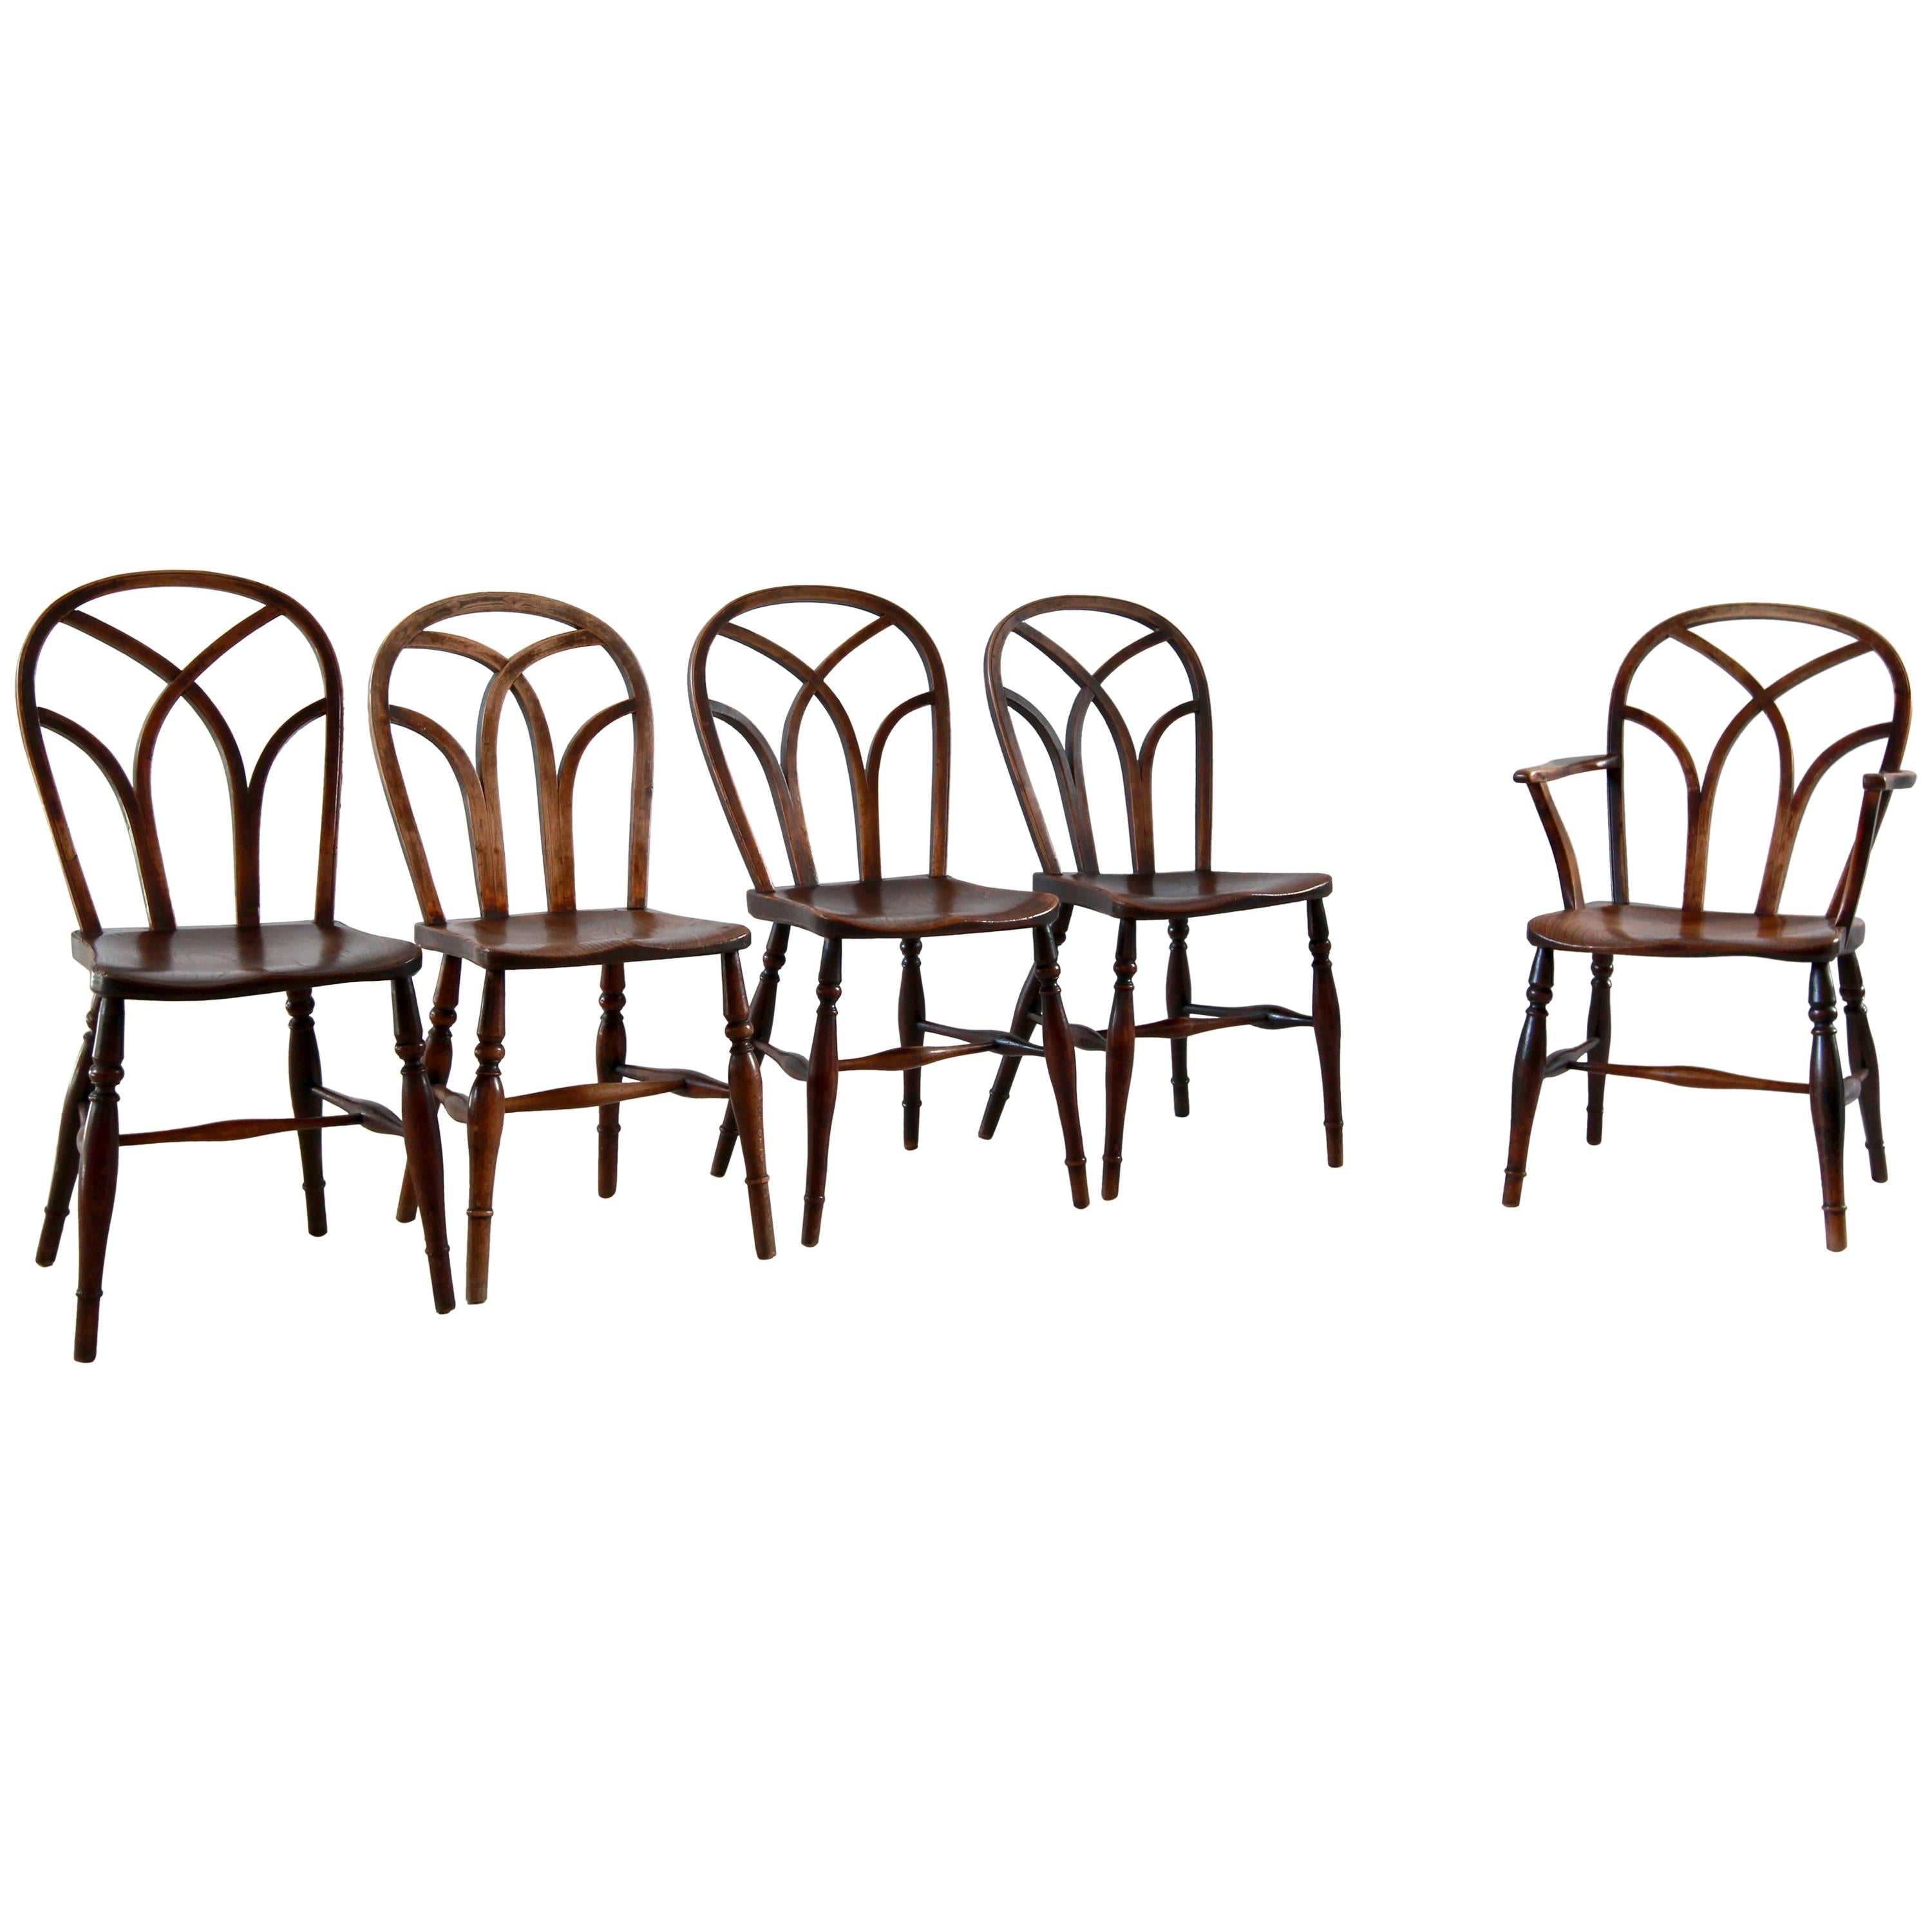 Set of Ten Farmhouse Style Dining Chairs